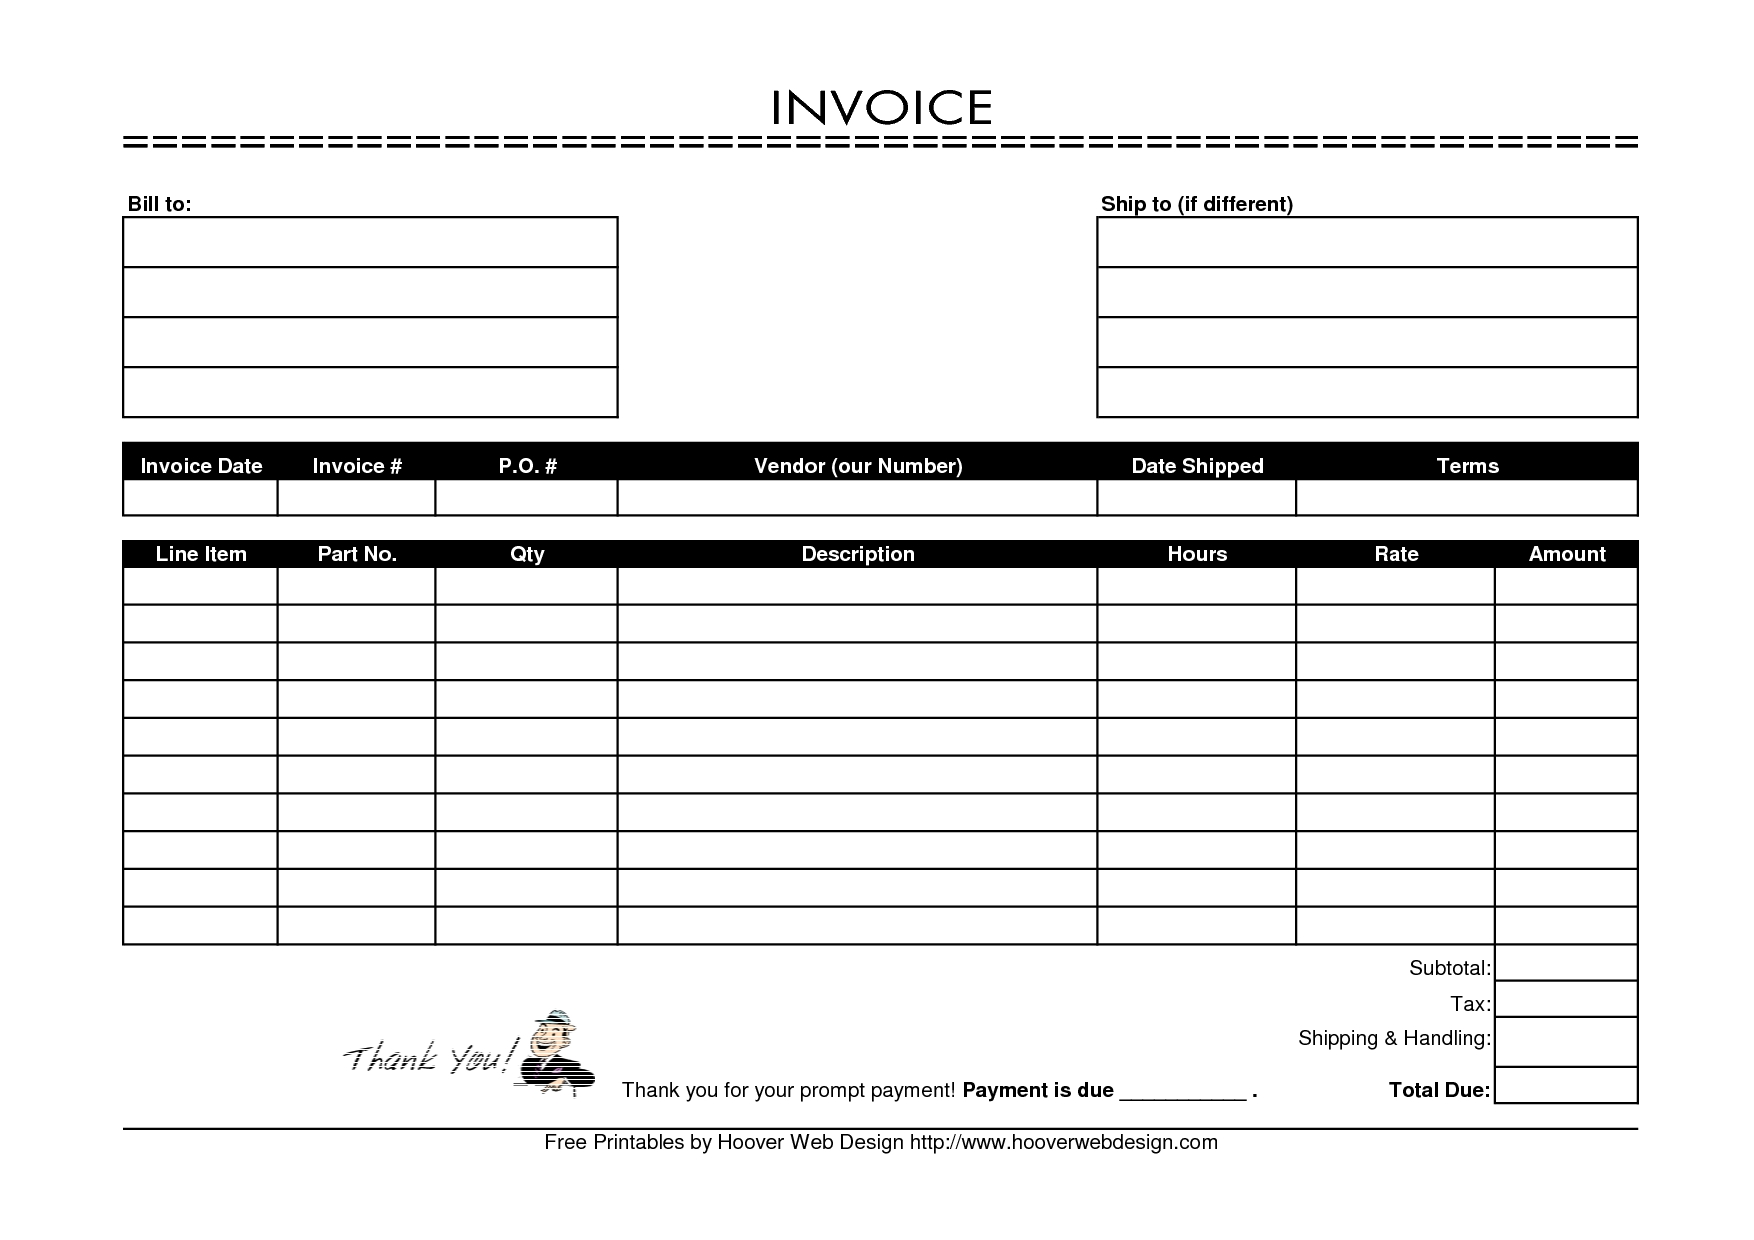 invoice receipt template free 18 best photos of free printable invoice receipt template free 1754 X 1240